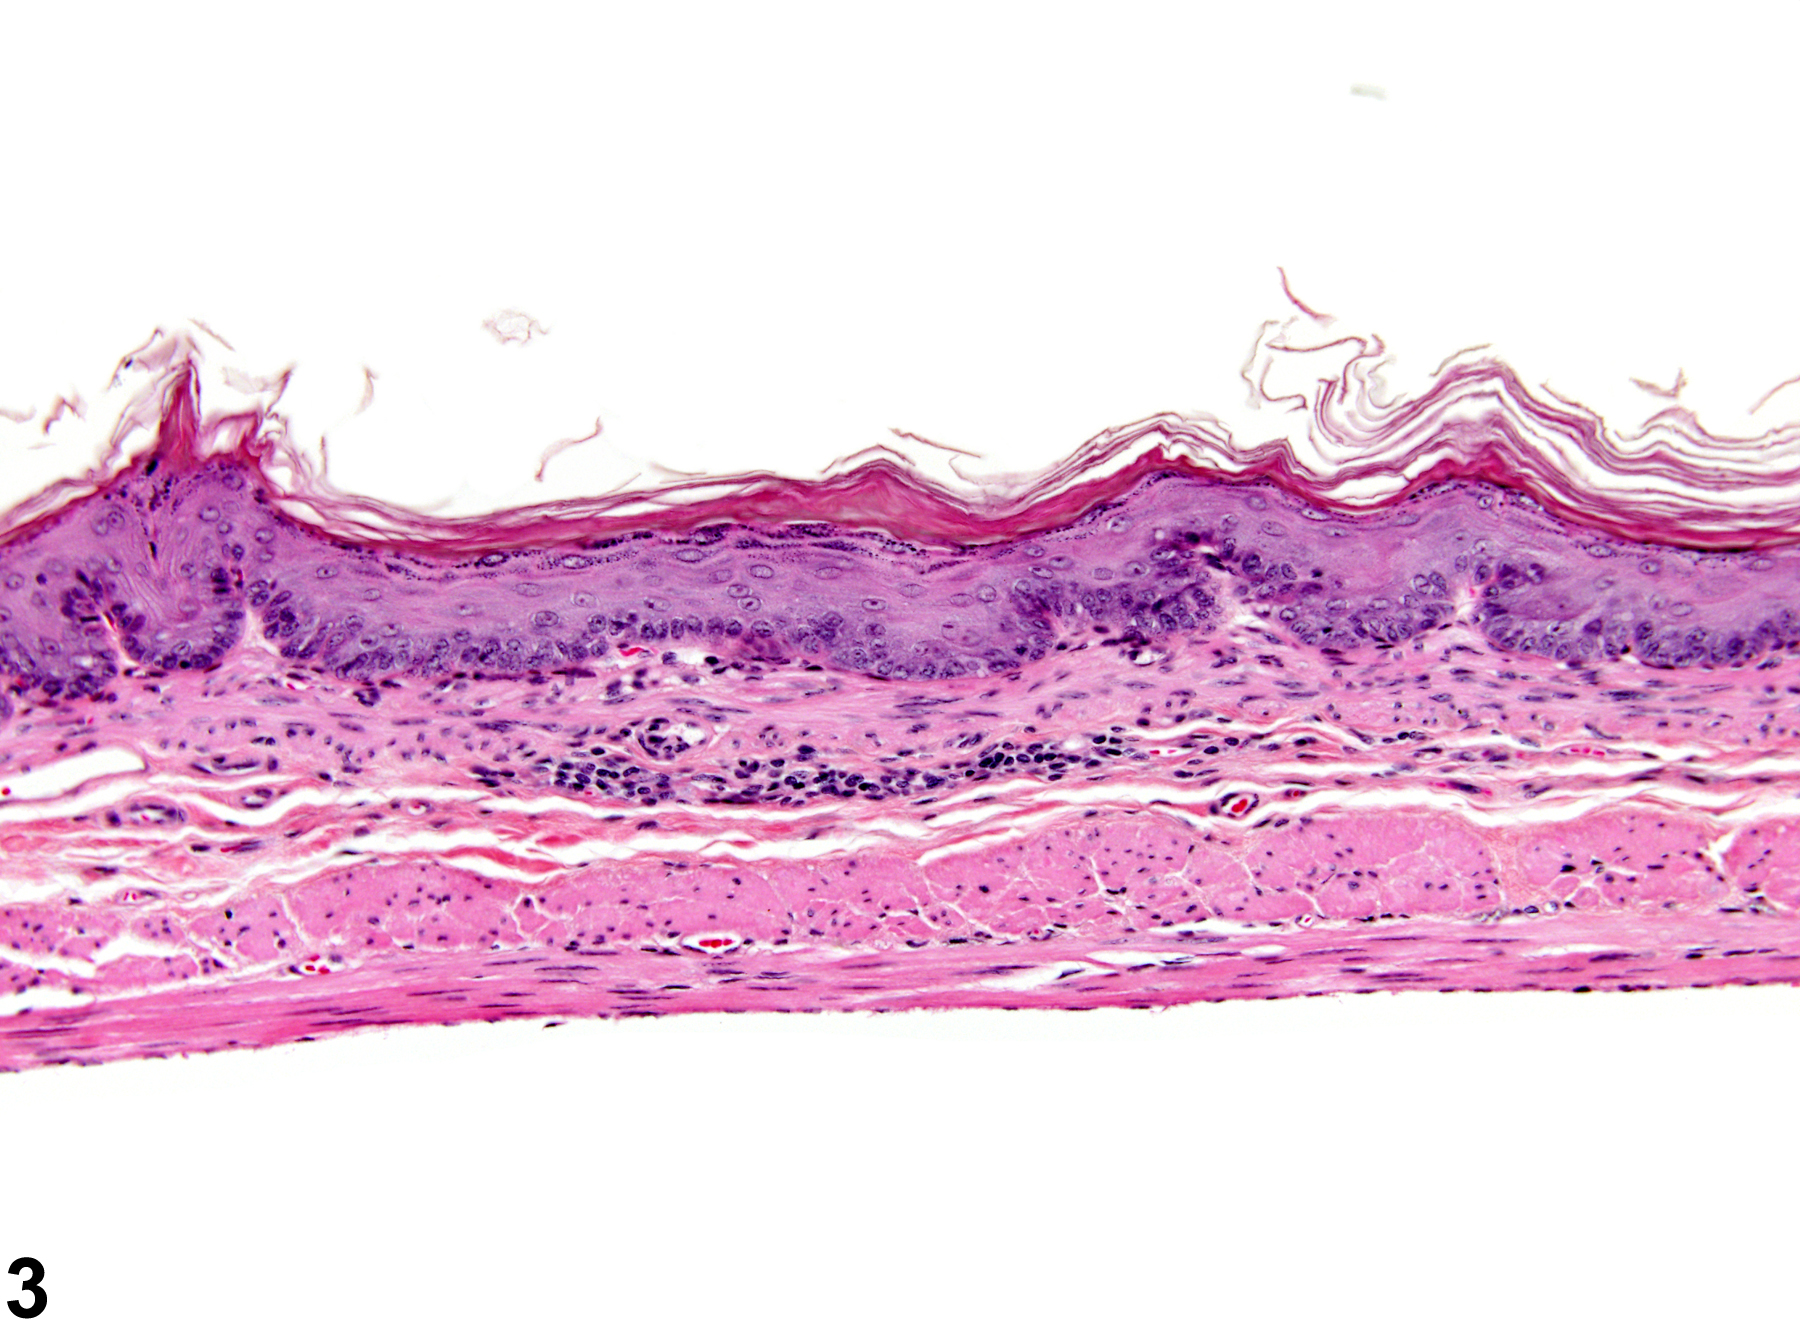 Image of inflammation in the forestomach from a female B6C3F1 mouse in a chronic study